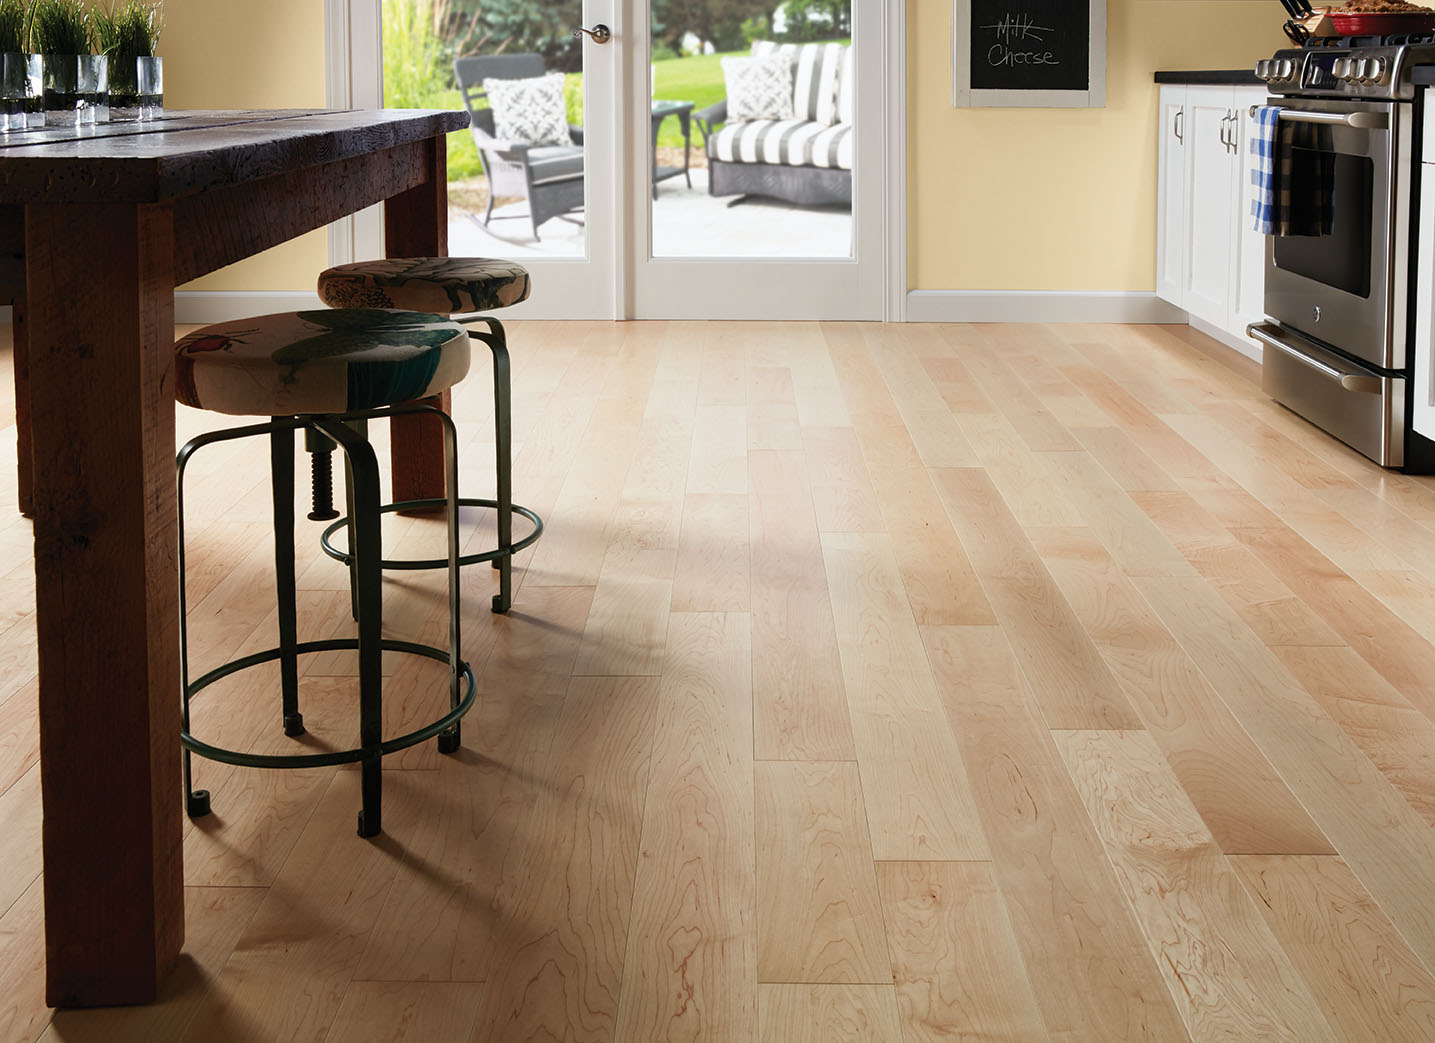 Owen S Collection Manufactured In Wisconsin Musolf S Wood Flooring